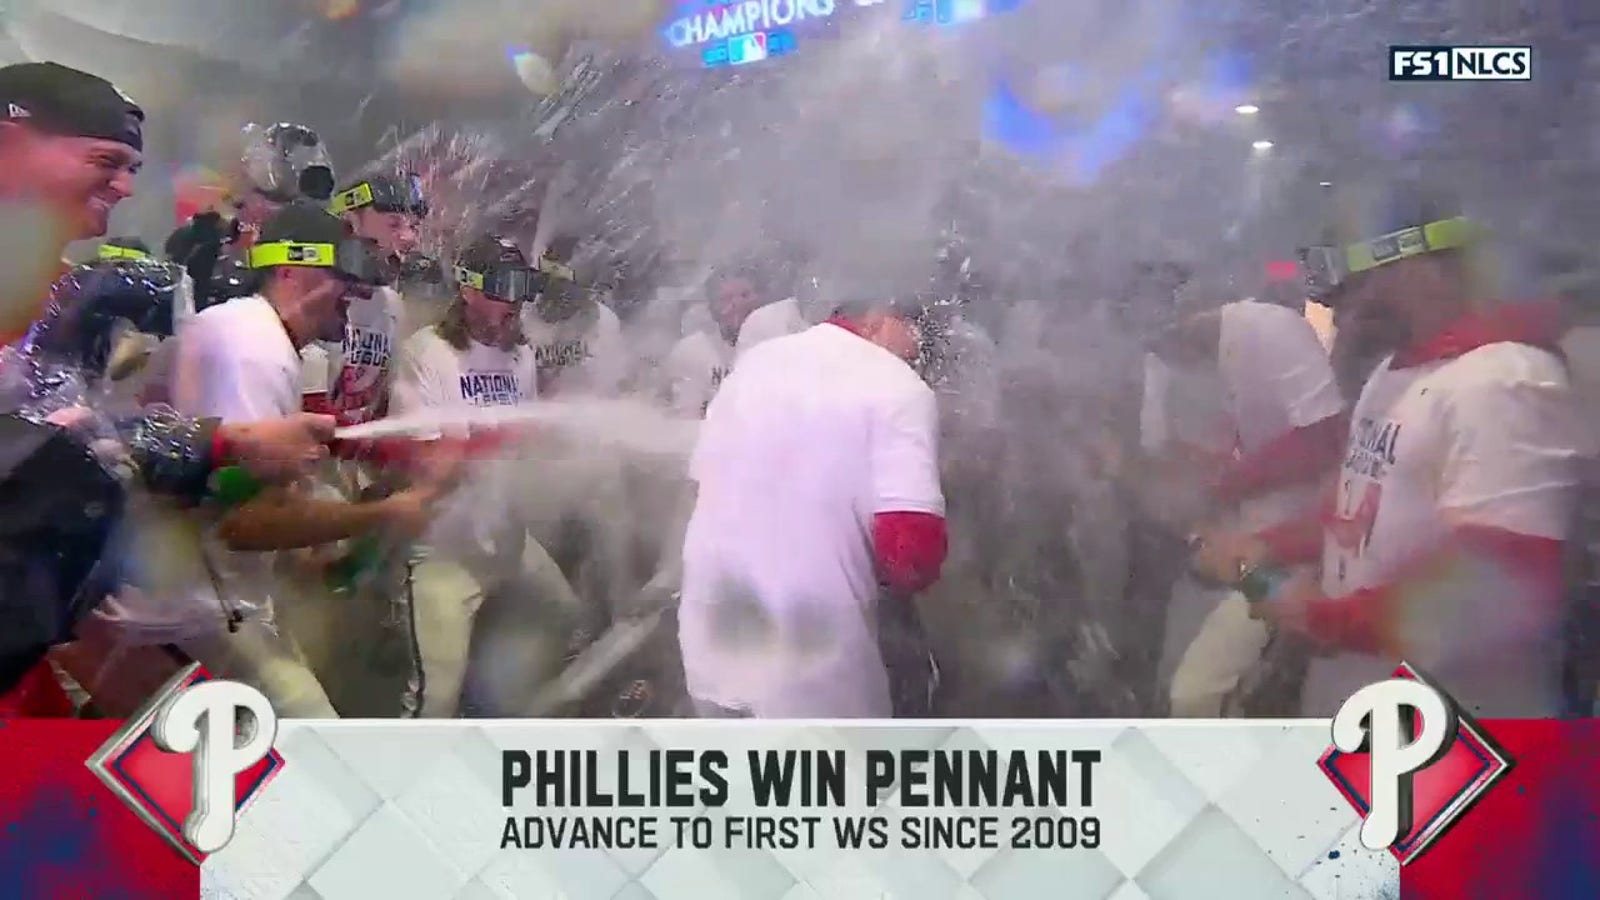 The Phillies pop champagne and celebrate